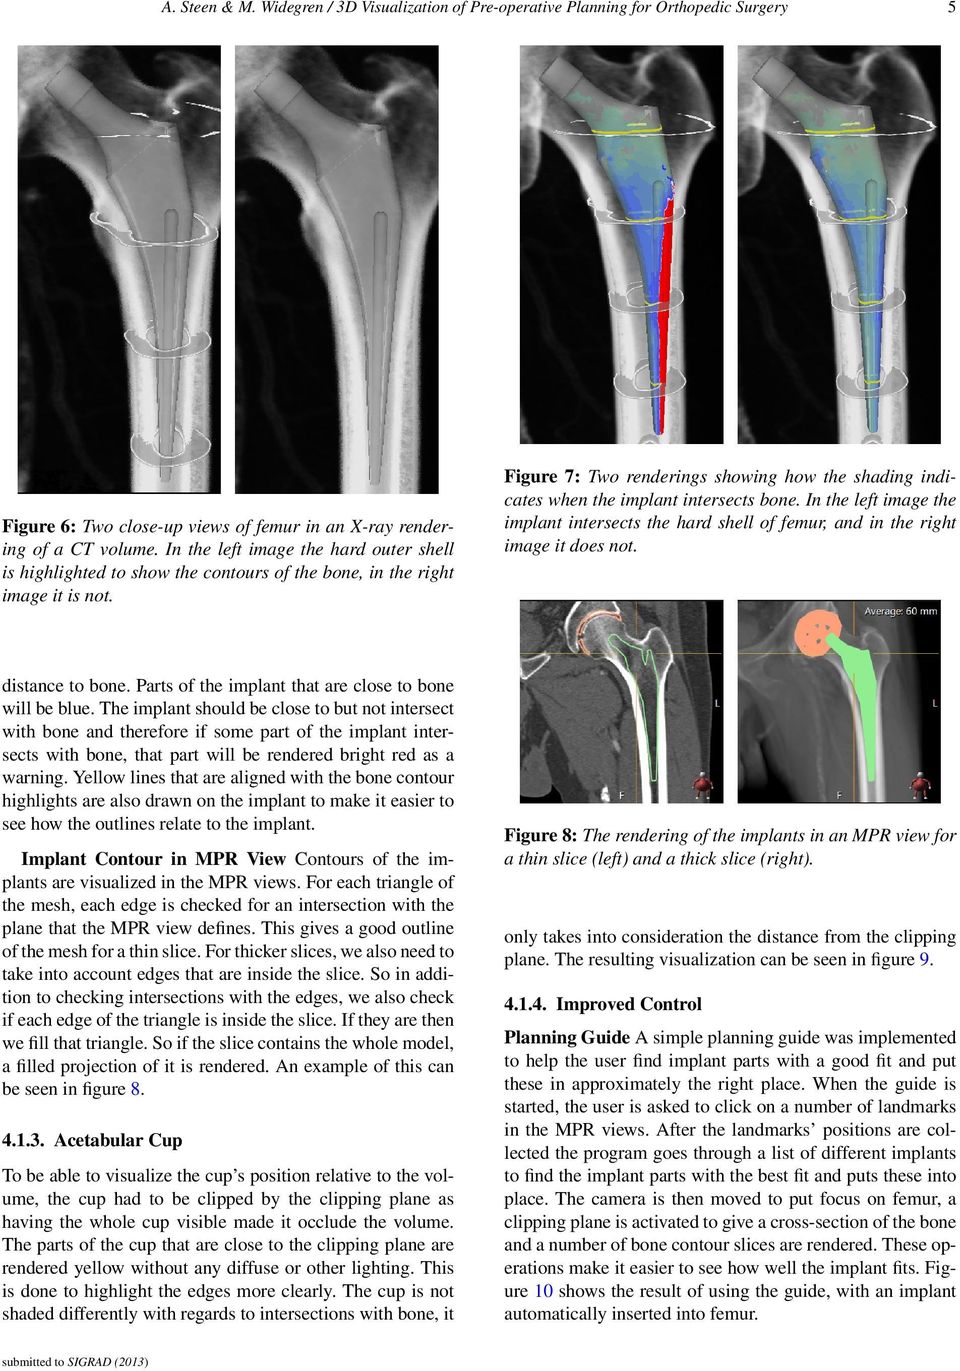 Figure 7: Two renderings showing how the shading indicates when the implant intersects bone. In the left image the implant intersects the hard shell of femur, and in the right image it does not.